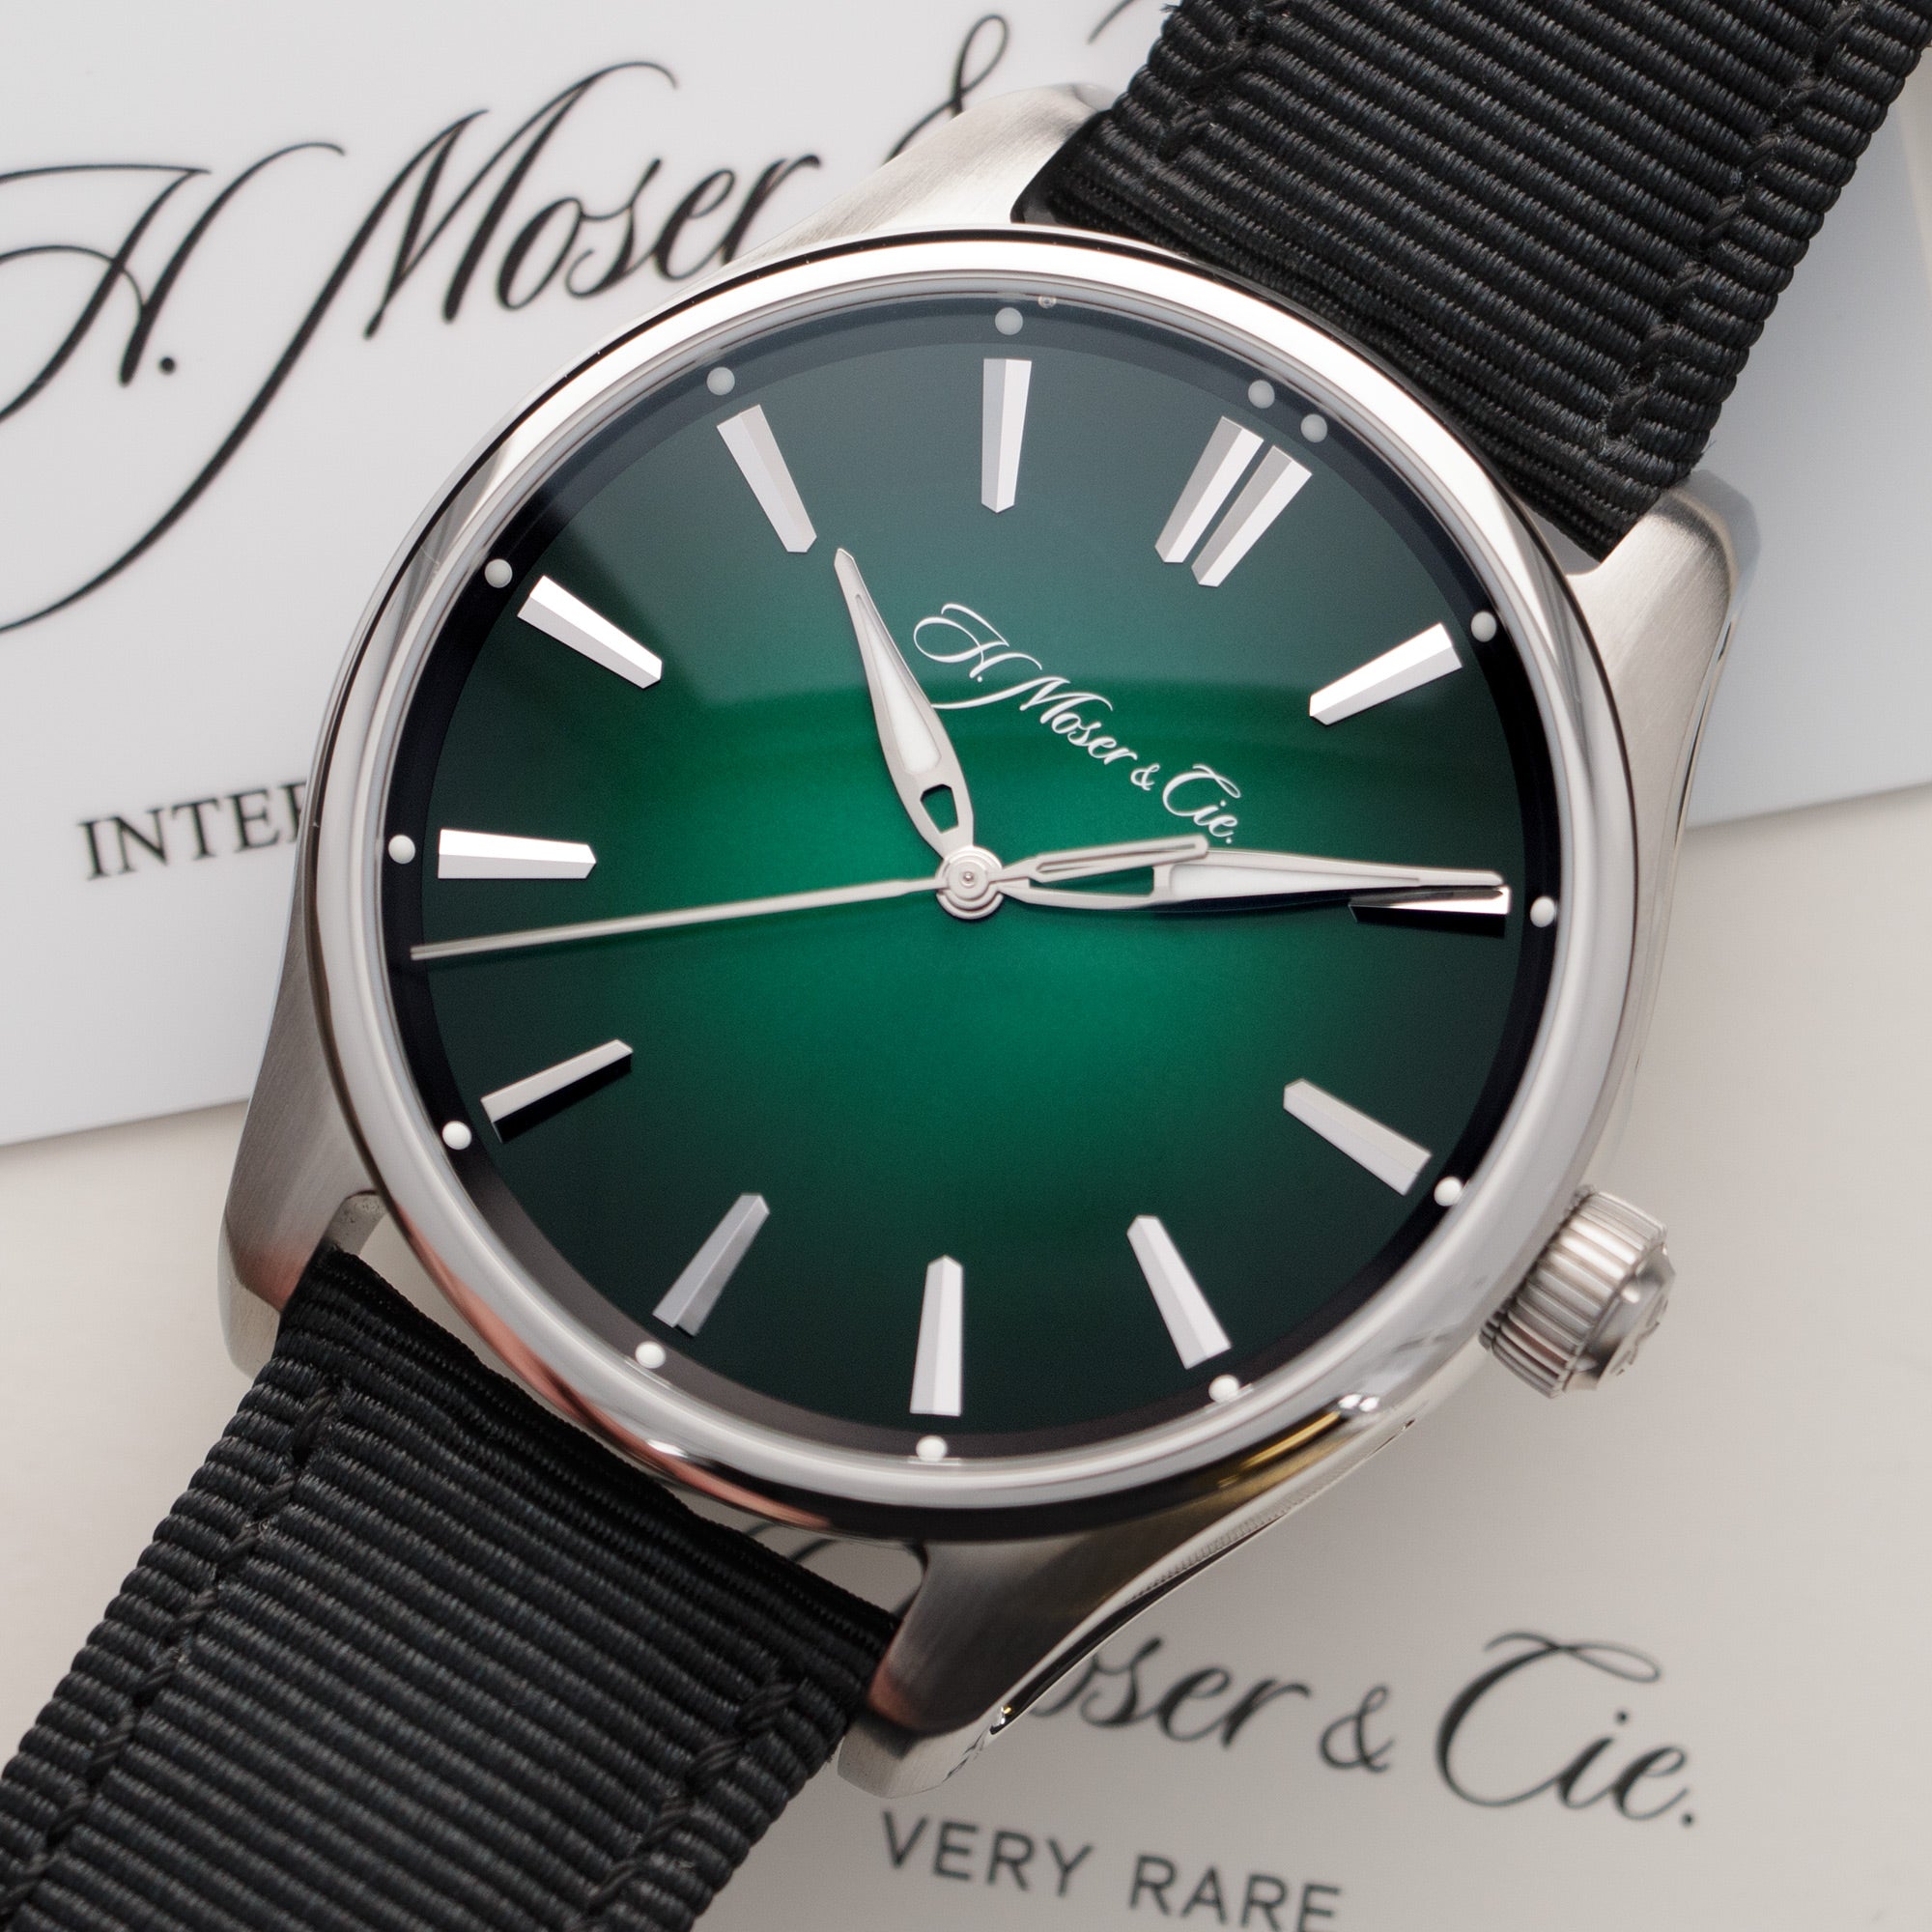 H. Moser & Cie - H. Moser & Cie Pioneer Centre Seconds Watch Ref. 3200-1202 - The Keystone Watches